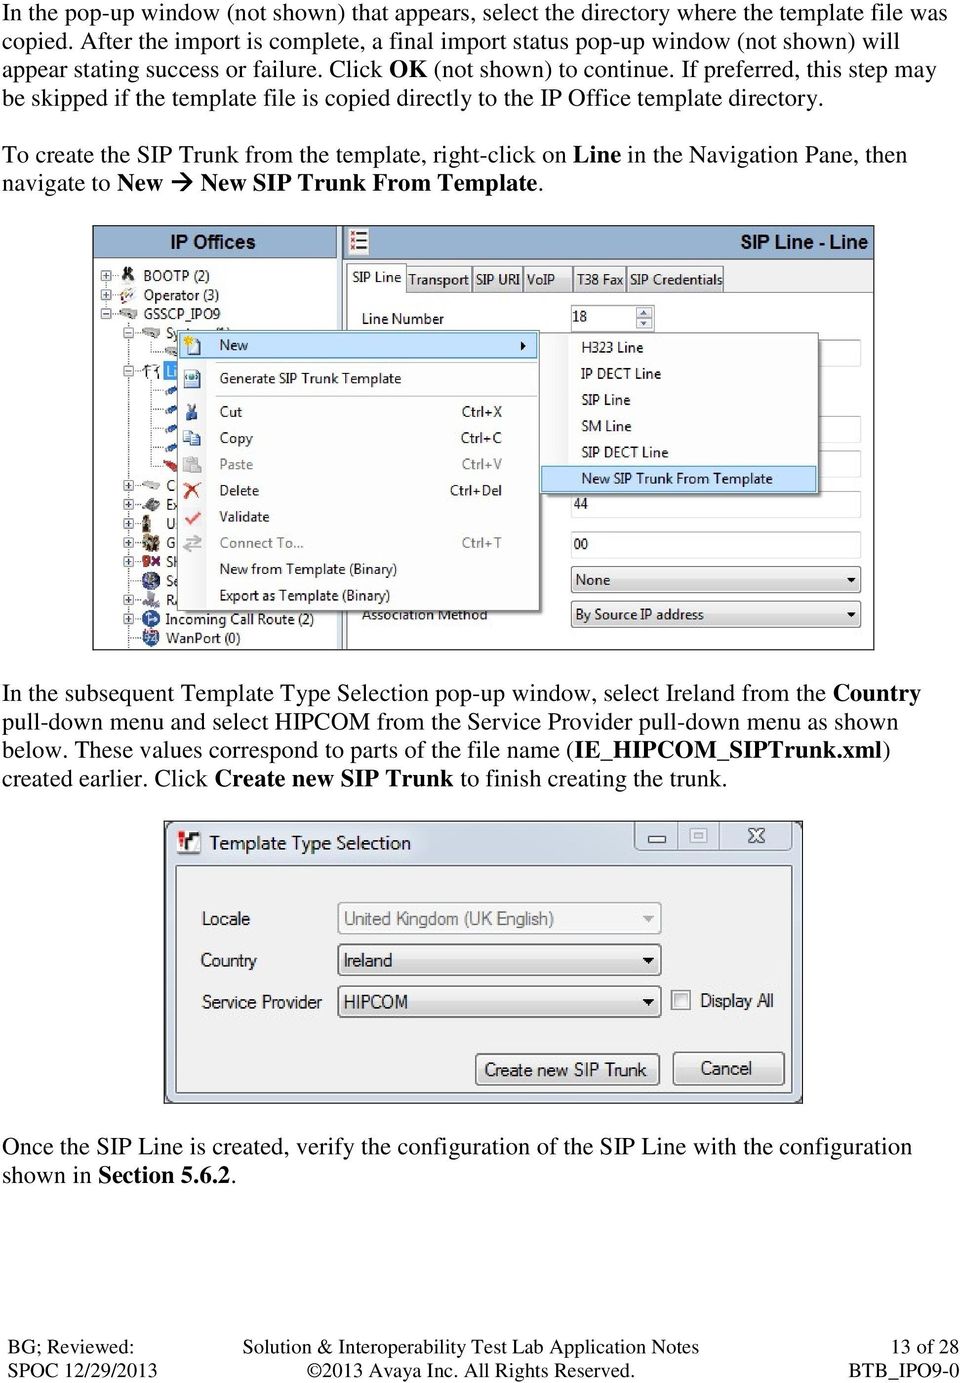 If preferred, this step may be skipped if the template file is copied directly to the IP Office template directory.